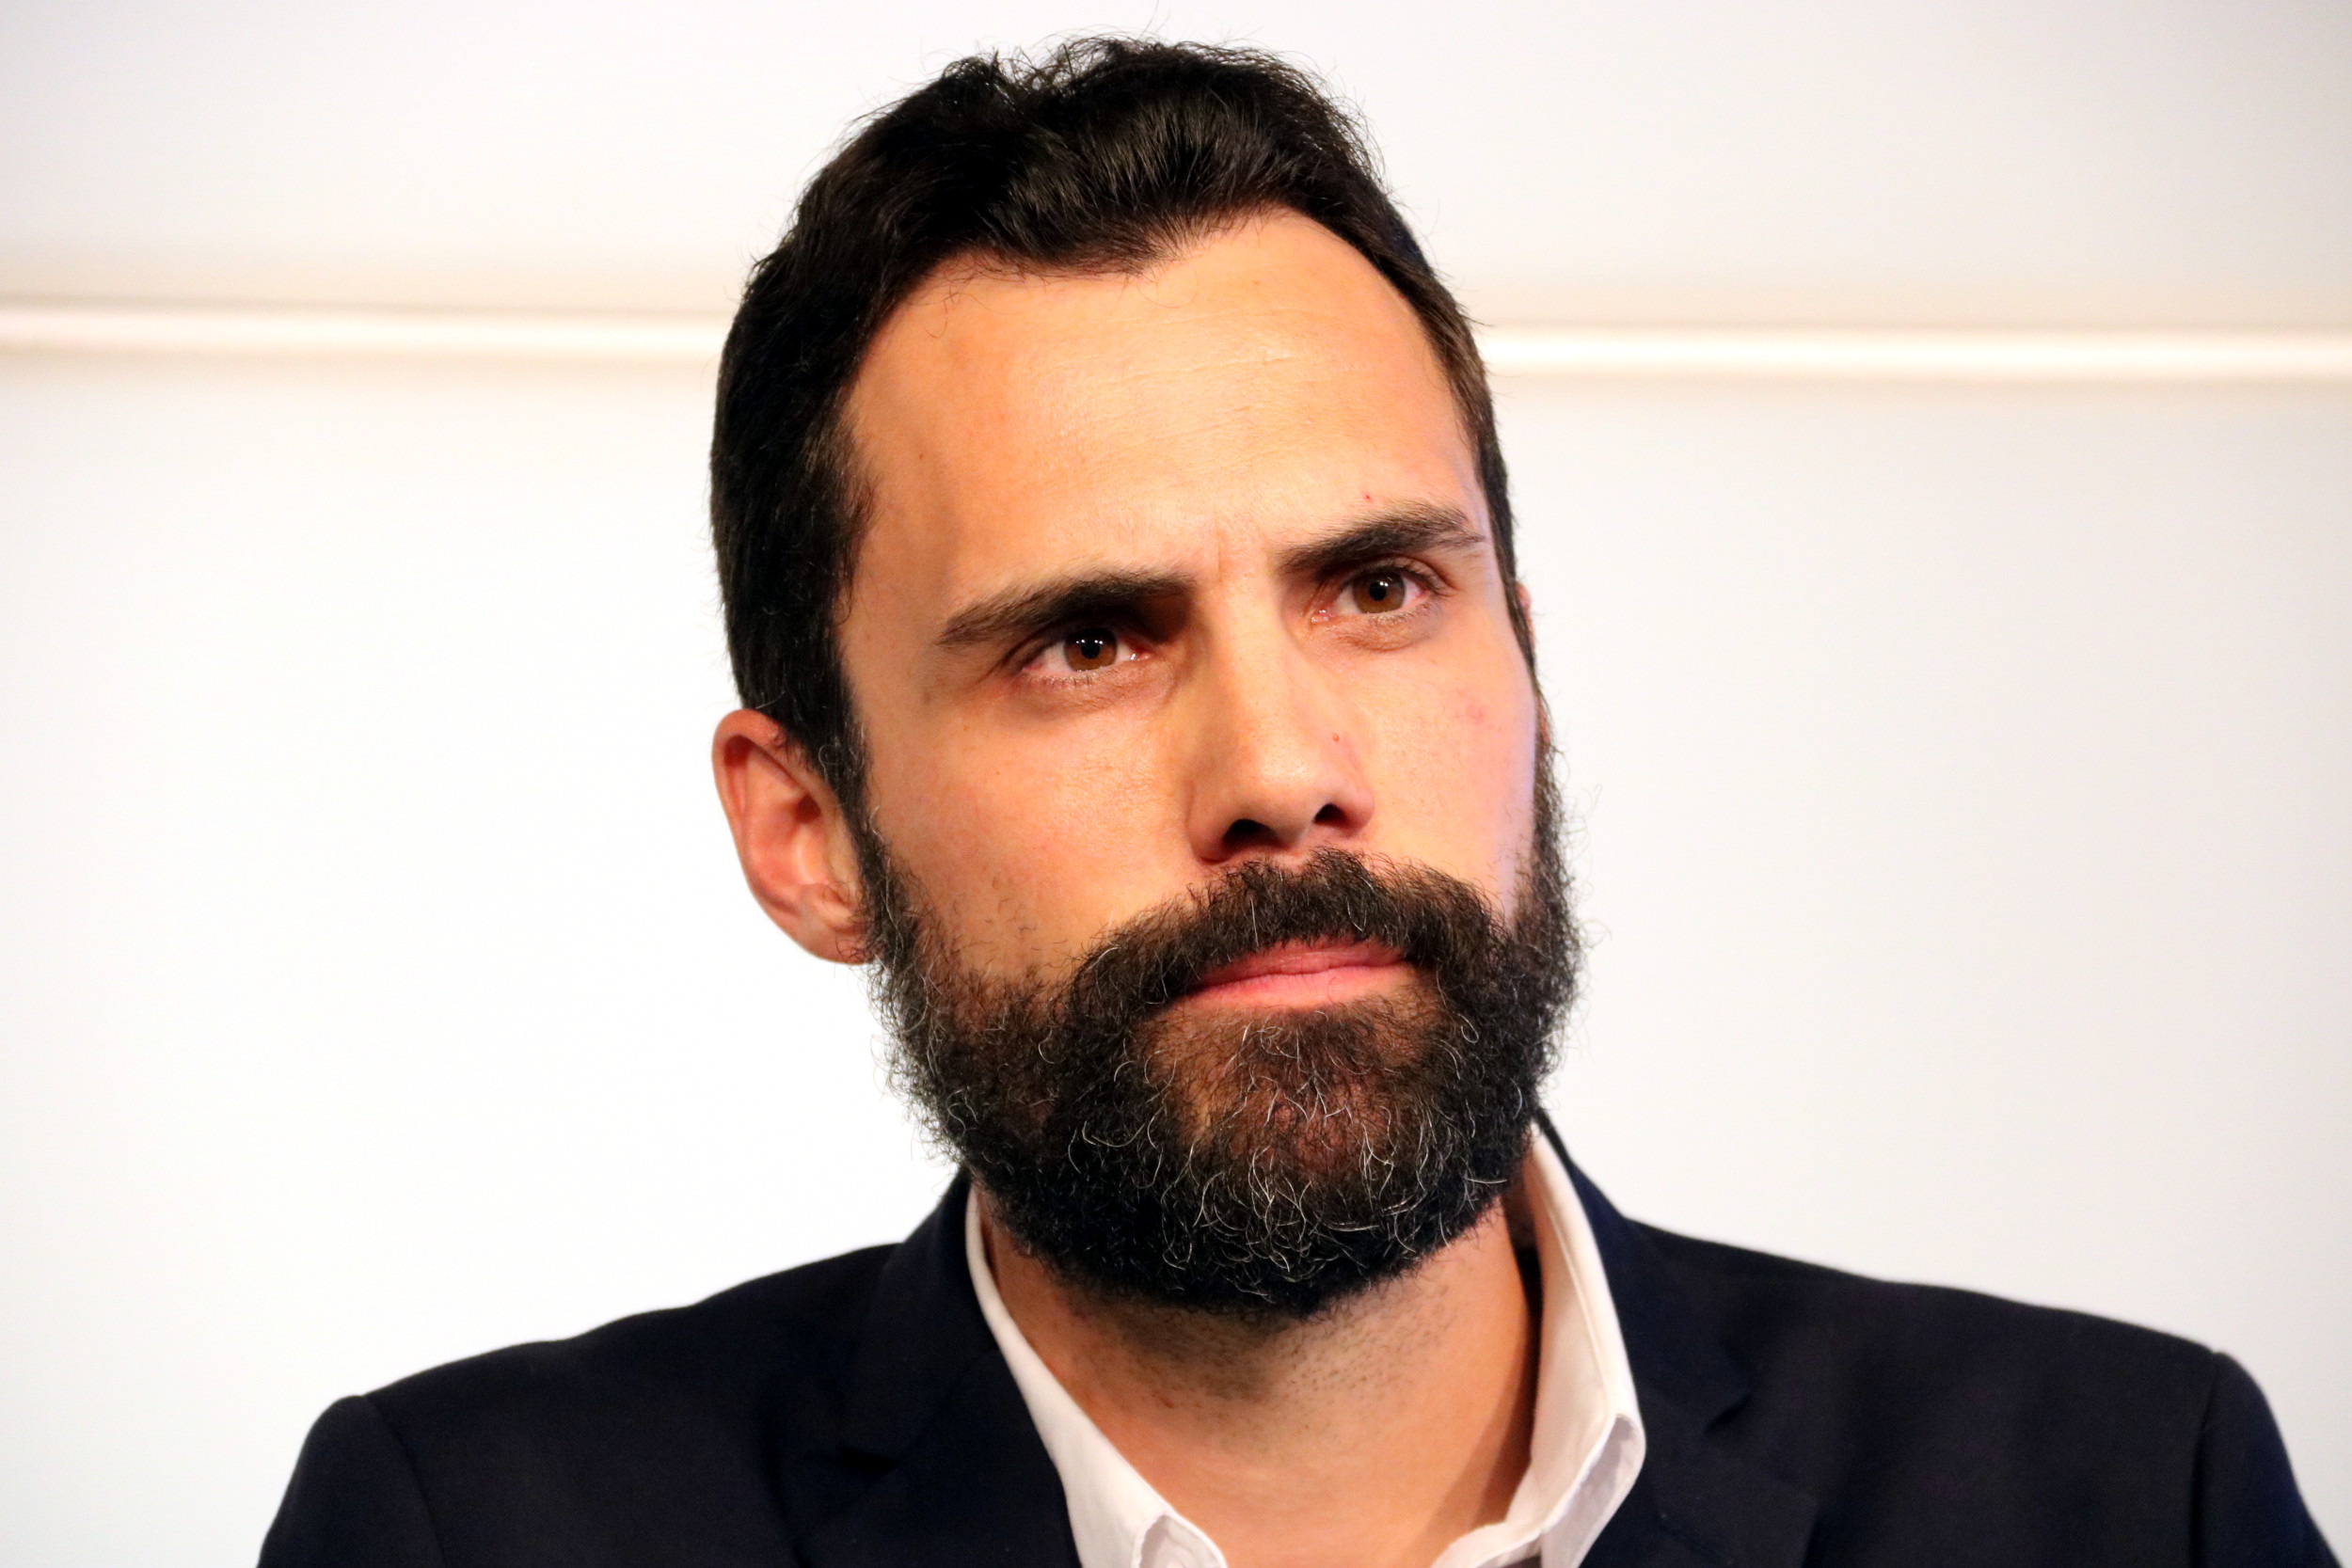 Roger Torrent is ERC's candidate to become President of the Catalan Parliament (by ACN)